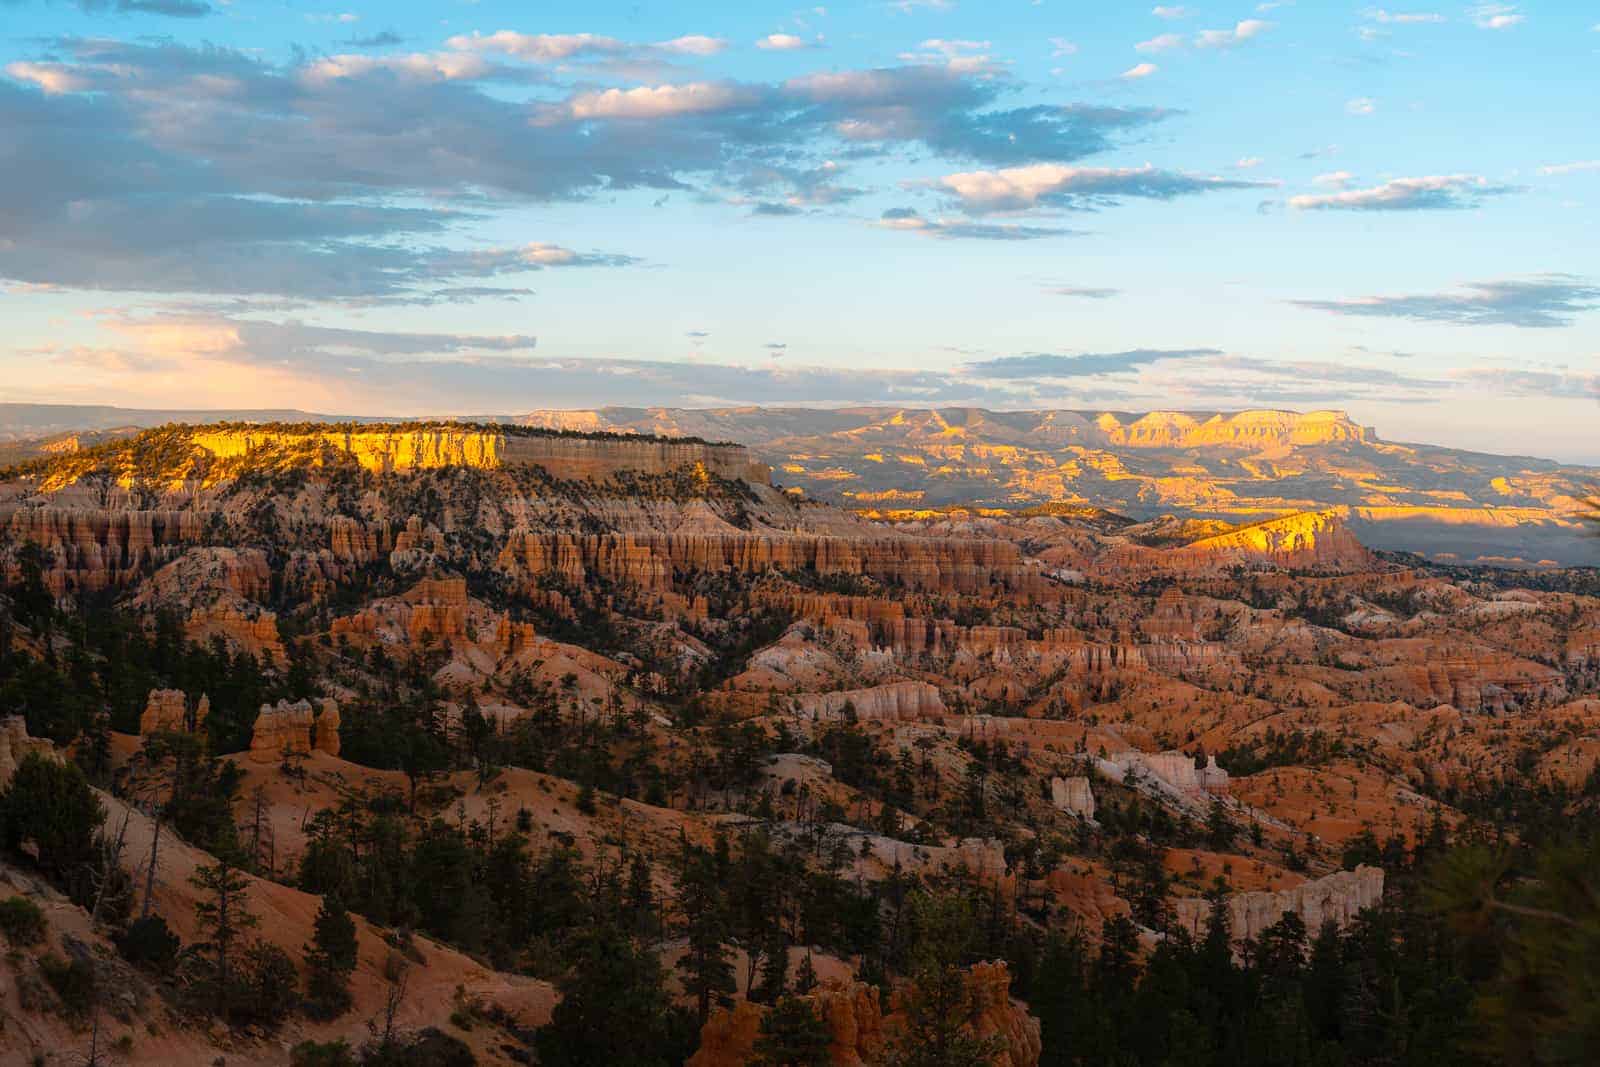 Sunset during one day at Bryce Canyon.